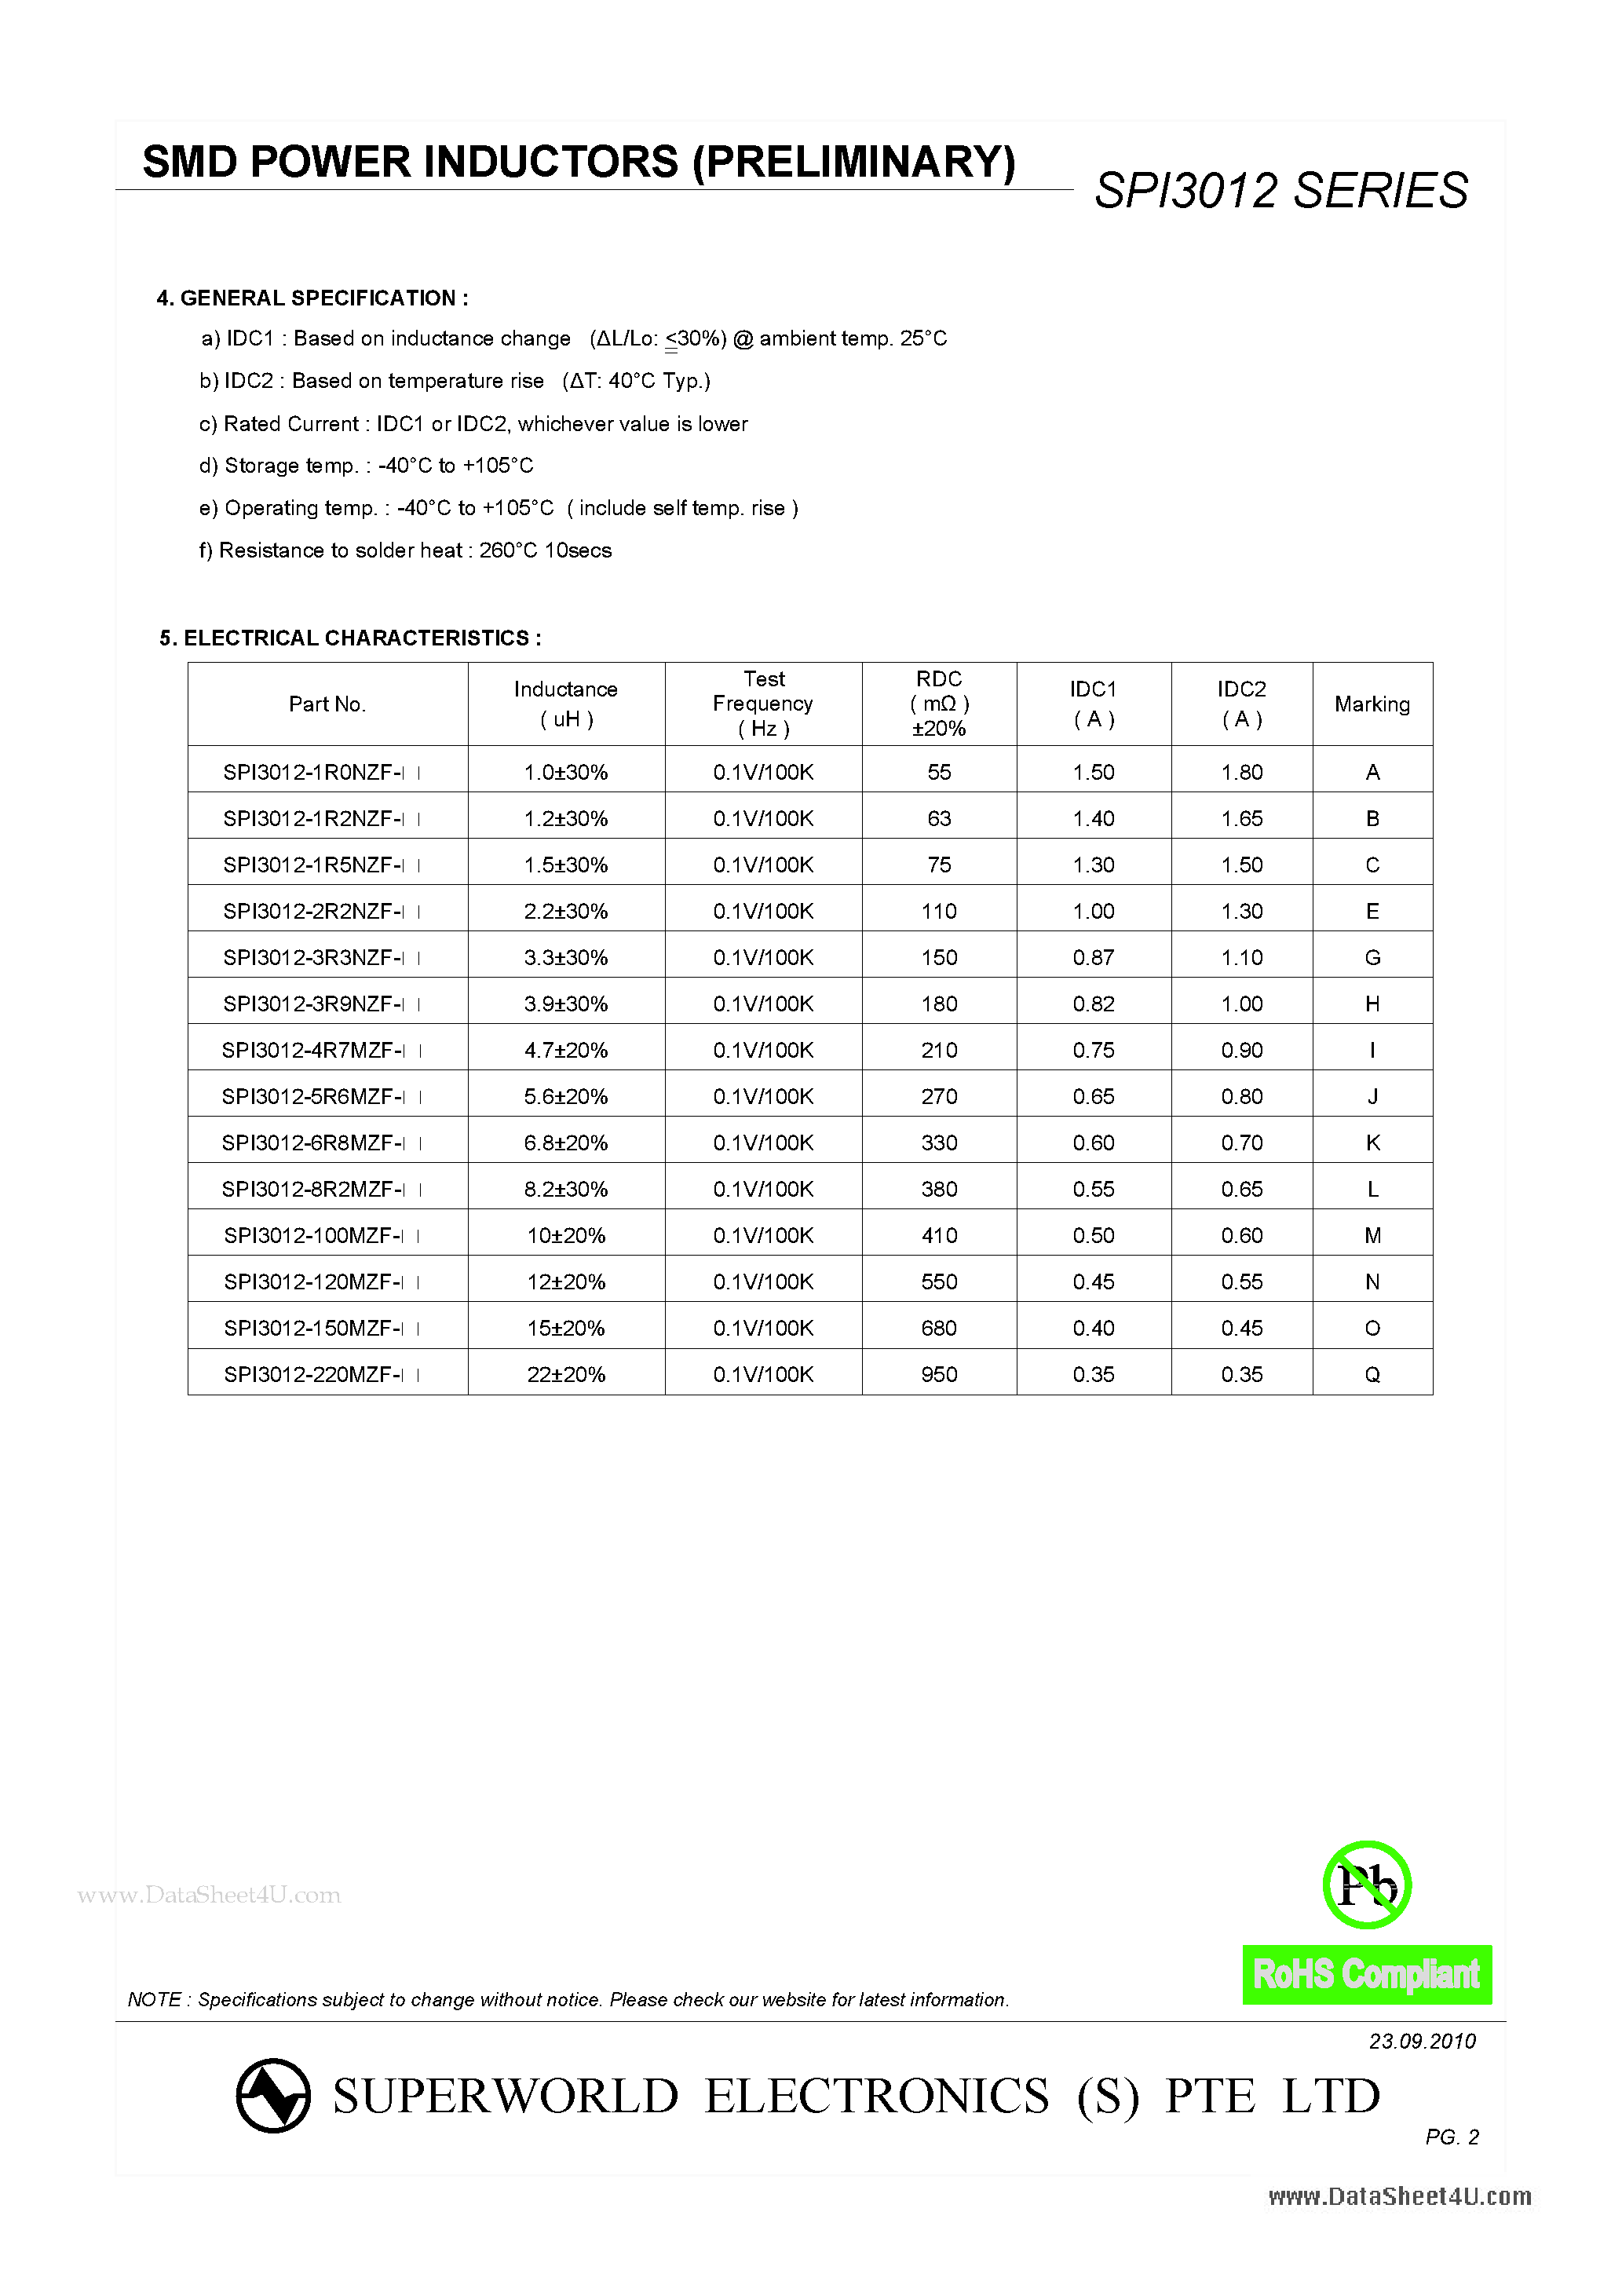 Datasheet SPI3012 - SMD POWER INDUCTORS page 2